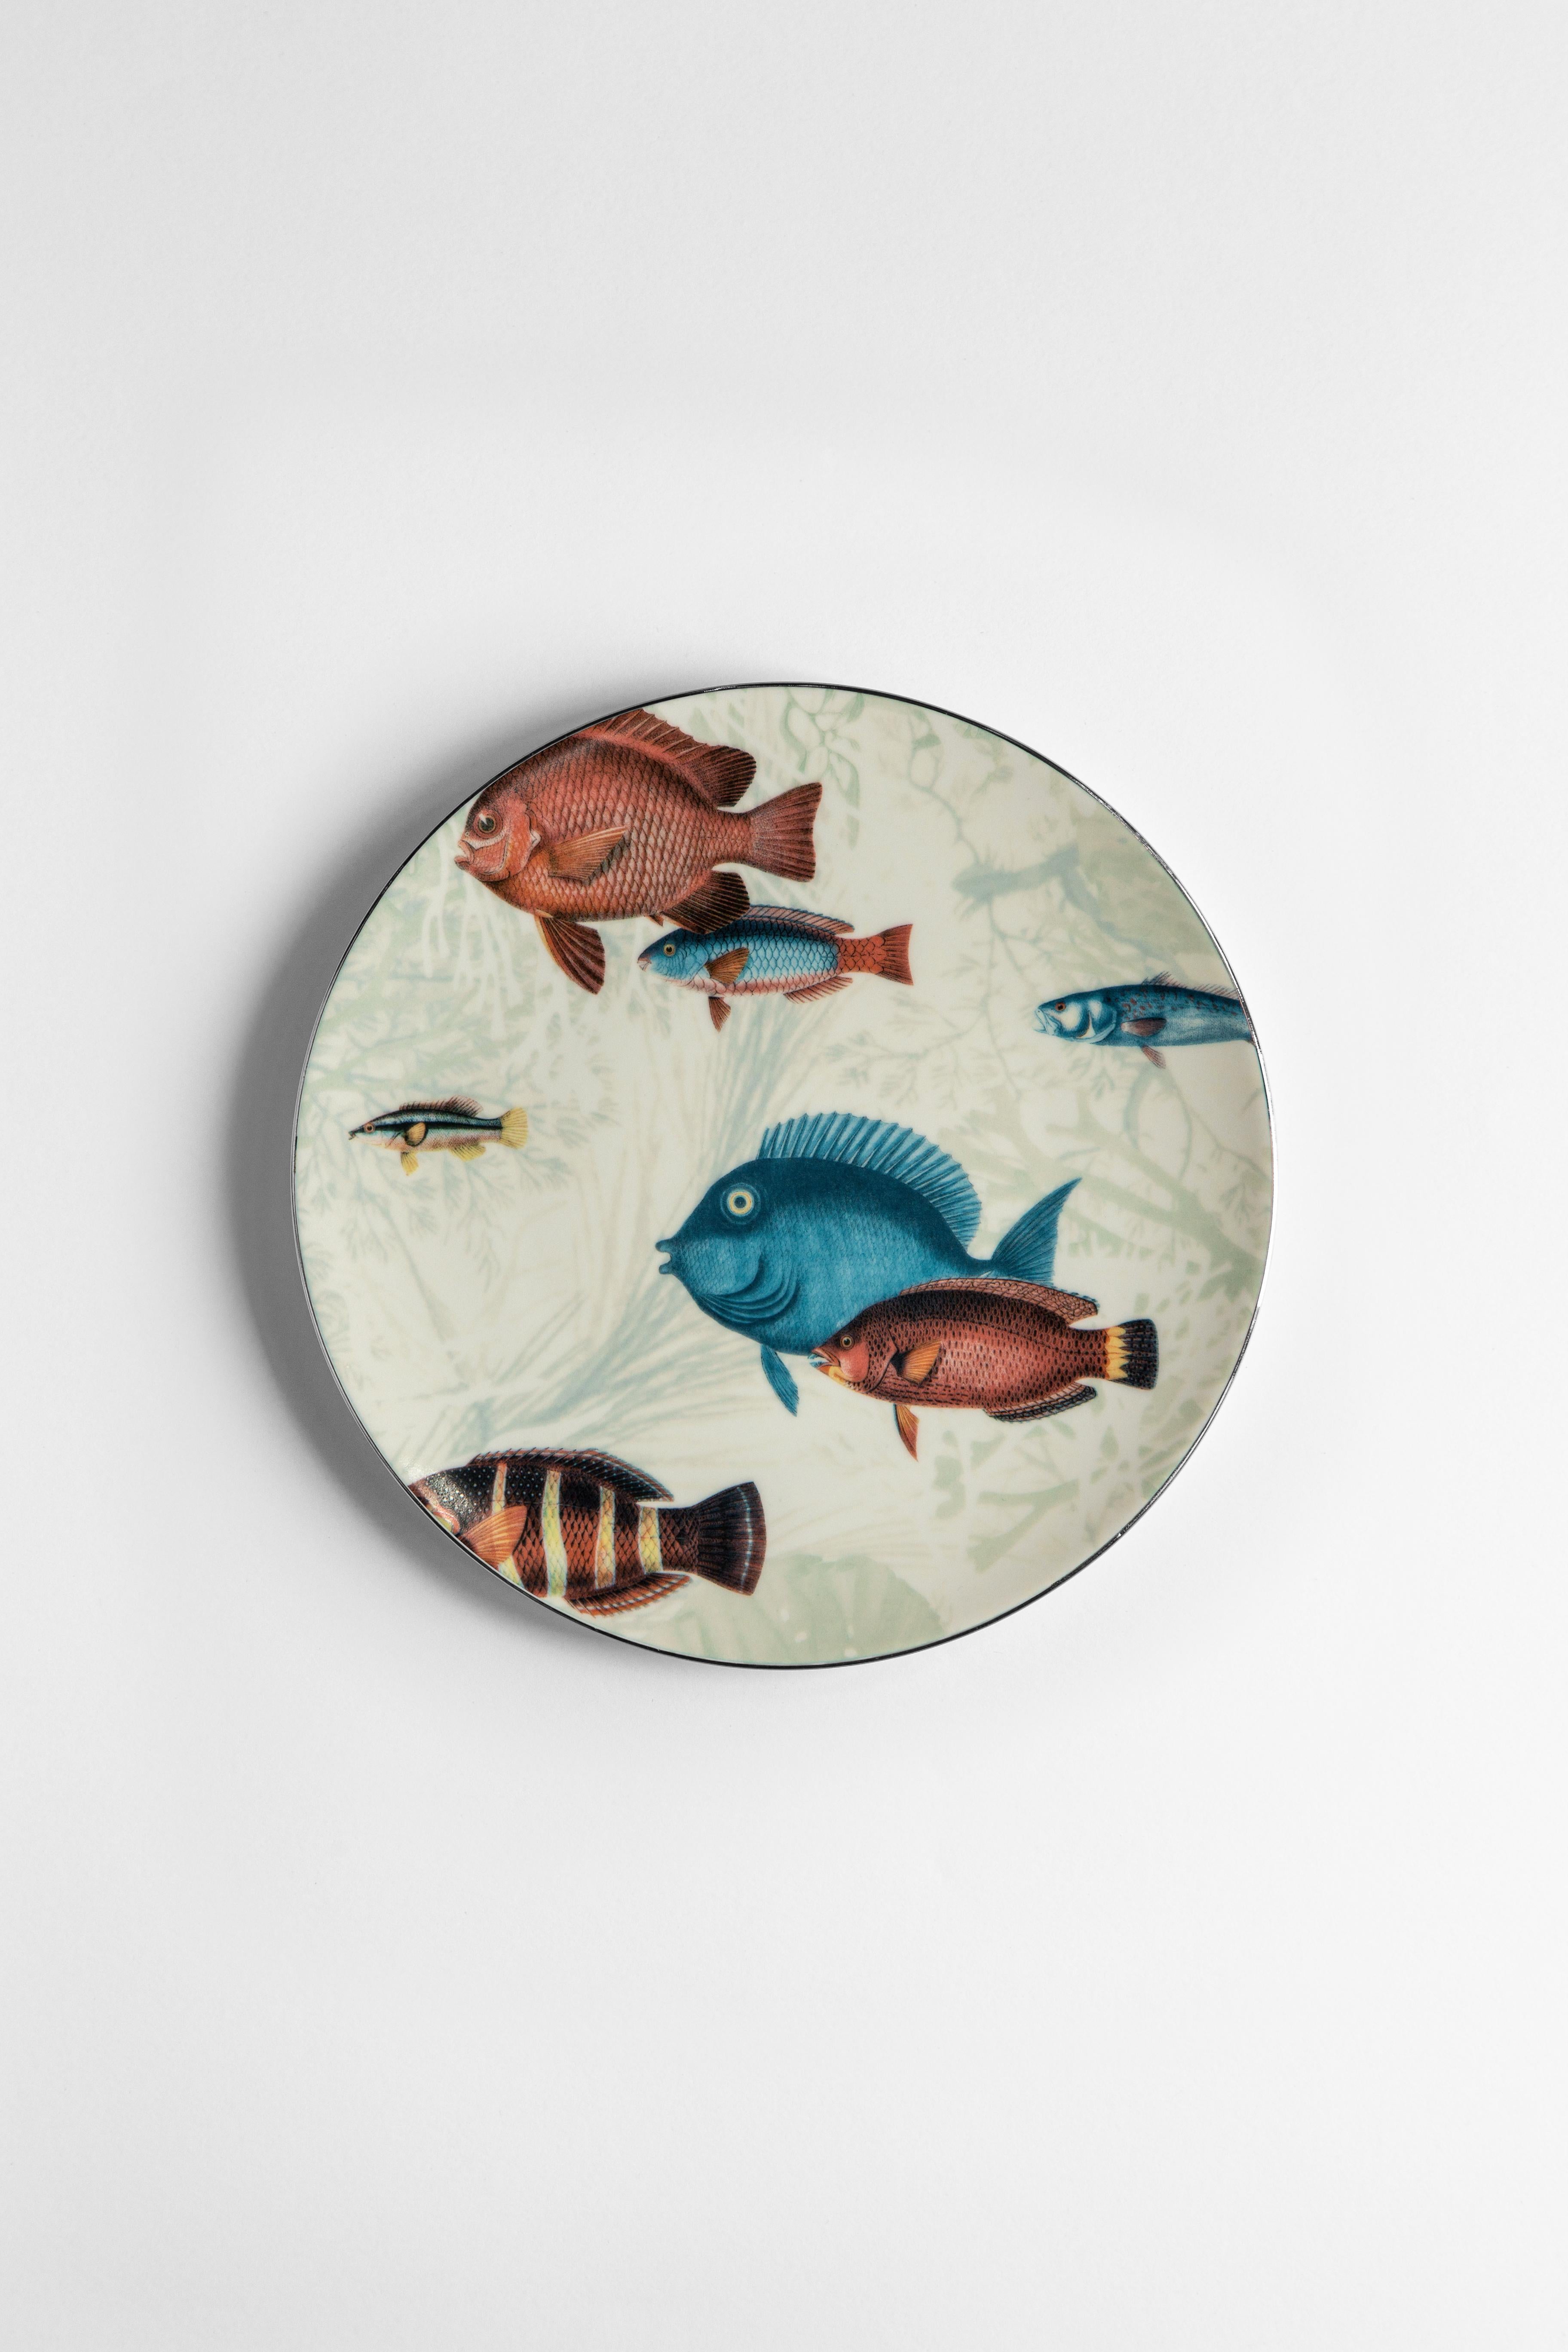 Inspired by the coral reef of the Amami Islands in Japan, the Amami collection features tropical fishes and beautiful seaweed. A perfect choice for every spot near the seaside.
6 desert plates.